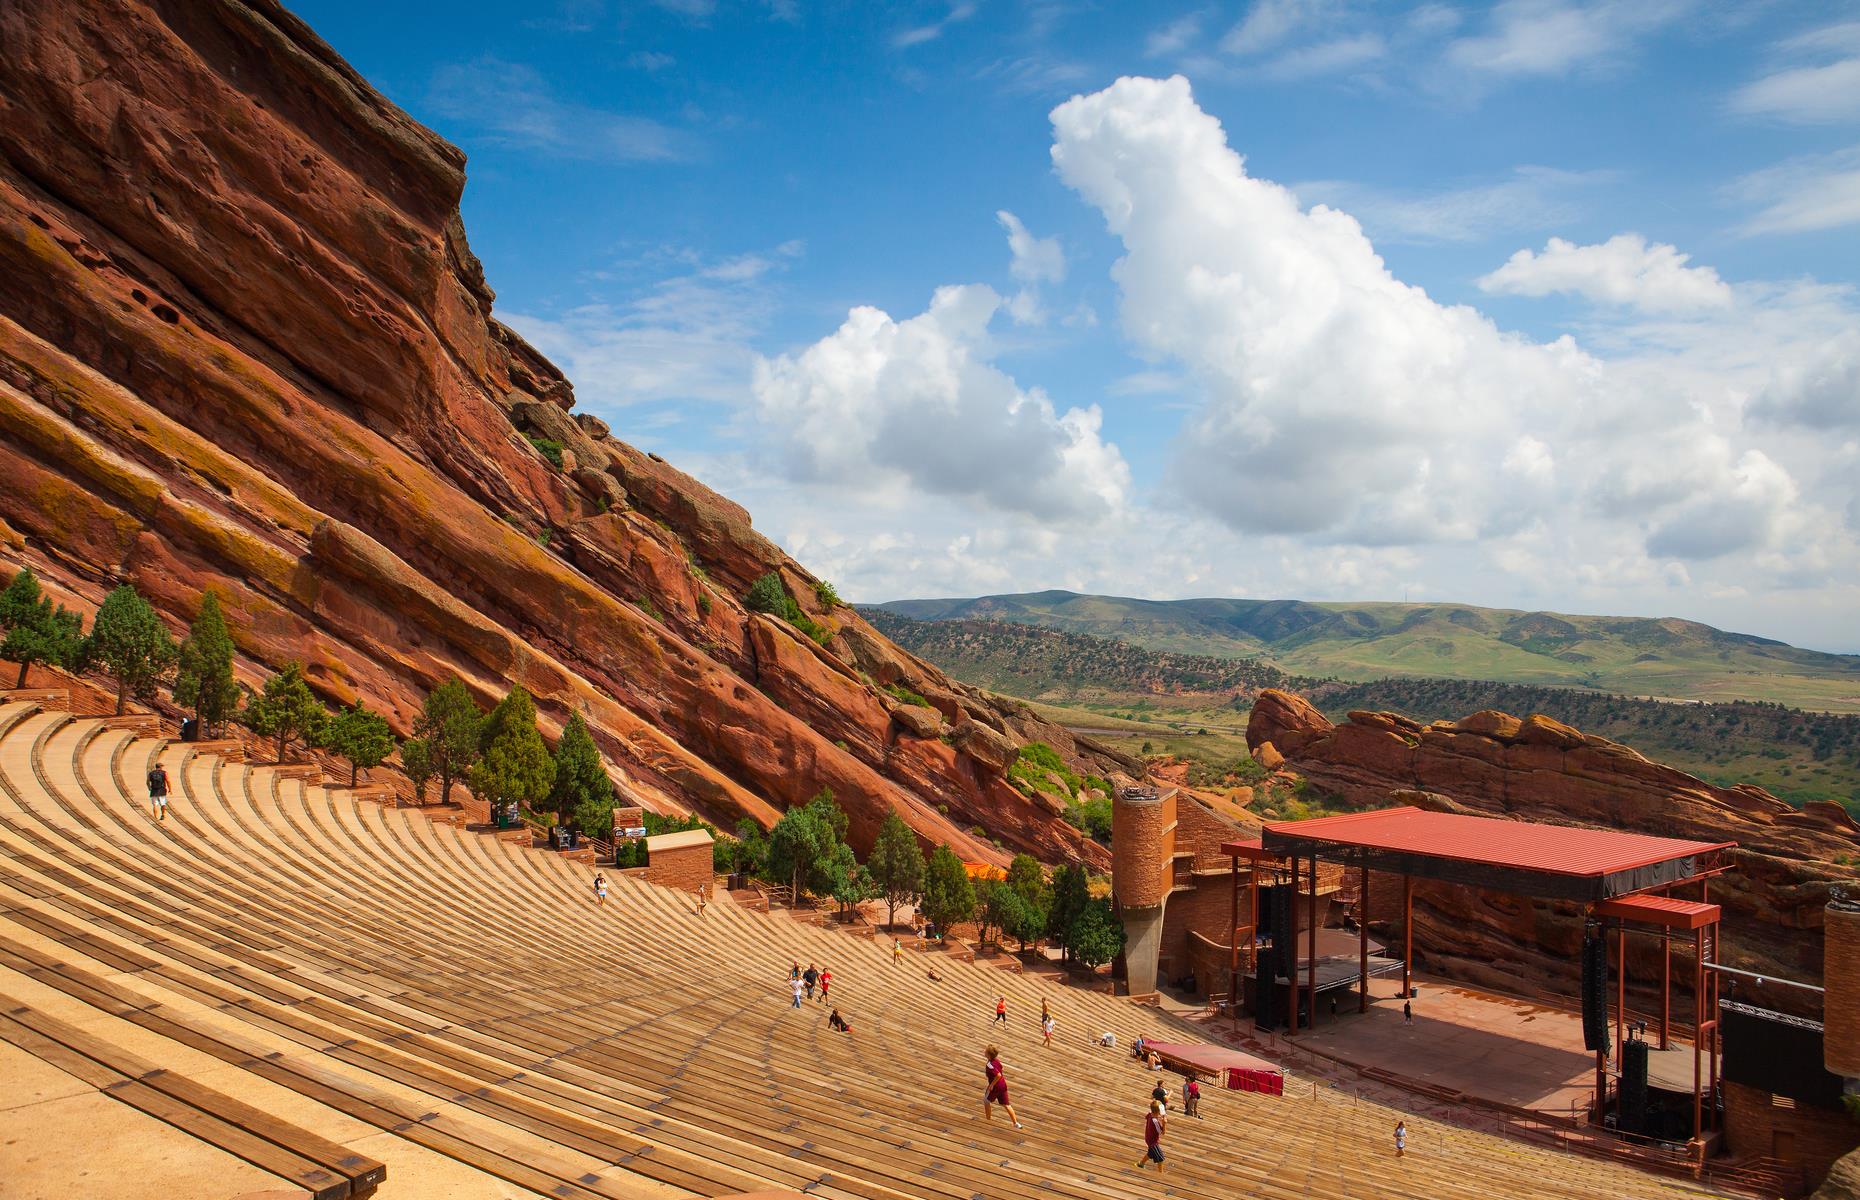 <p>"There's no better place to see the stars" so <a href="https://www.redrocksonline.com">Red Rocks</a> proudly touts and that may well be true. The natural open-air amphitheater has played host to musical greats including Elton John, The Beatles, Jimi Hendrix and Aretha Franklin, with a star-studded night sky offering a perfect backdrop. During daylight hours, outdoorsy types can take to scenic hiking routes such as the Red Rocks Trail. </p>  <p><a href="http://bit.ly/3roL4wv"><strong>Love this? Follow our Facebook page for more travel inspiration</strong></a></p>